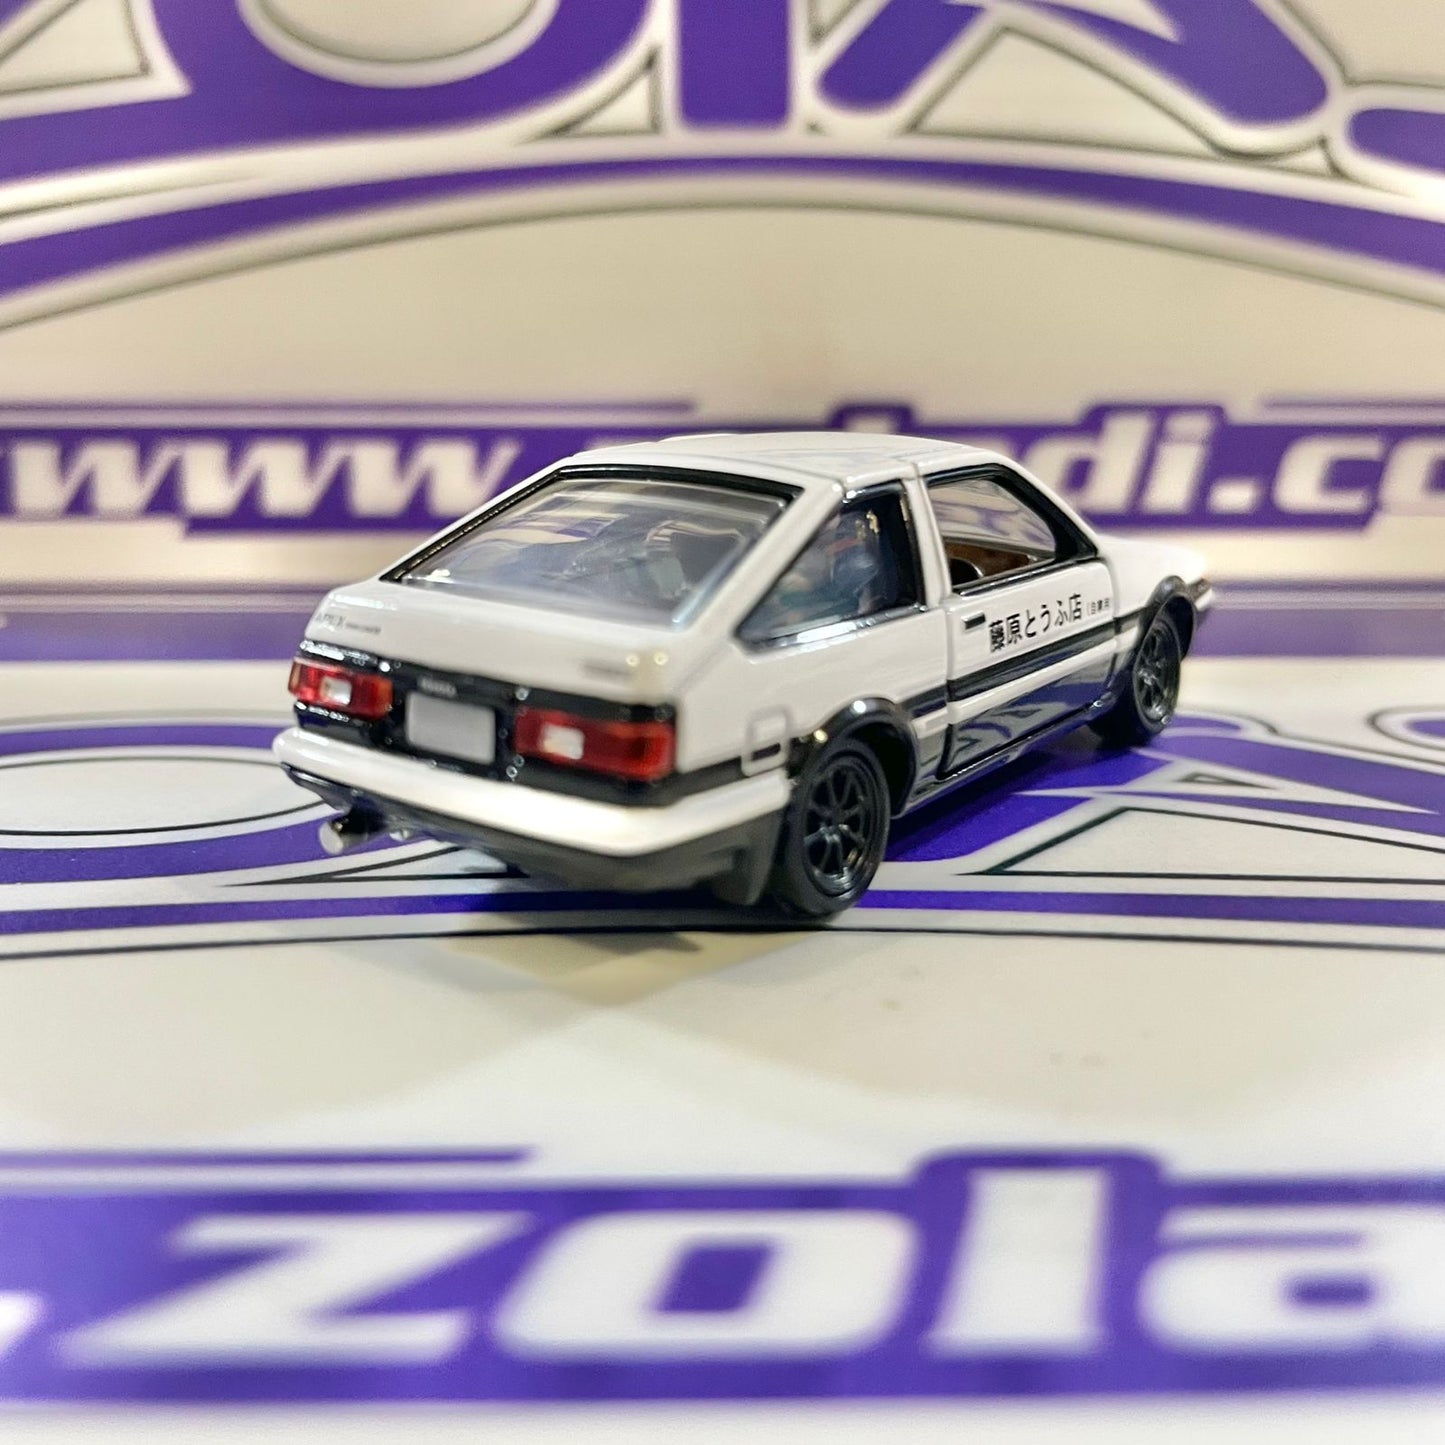 TOMICA TOYOTA AE86 INITIAL D